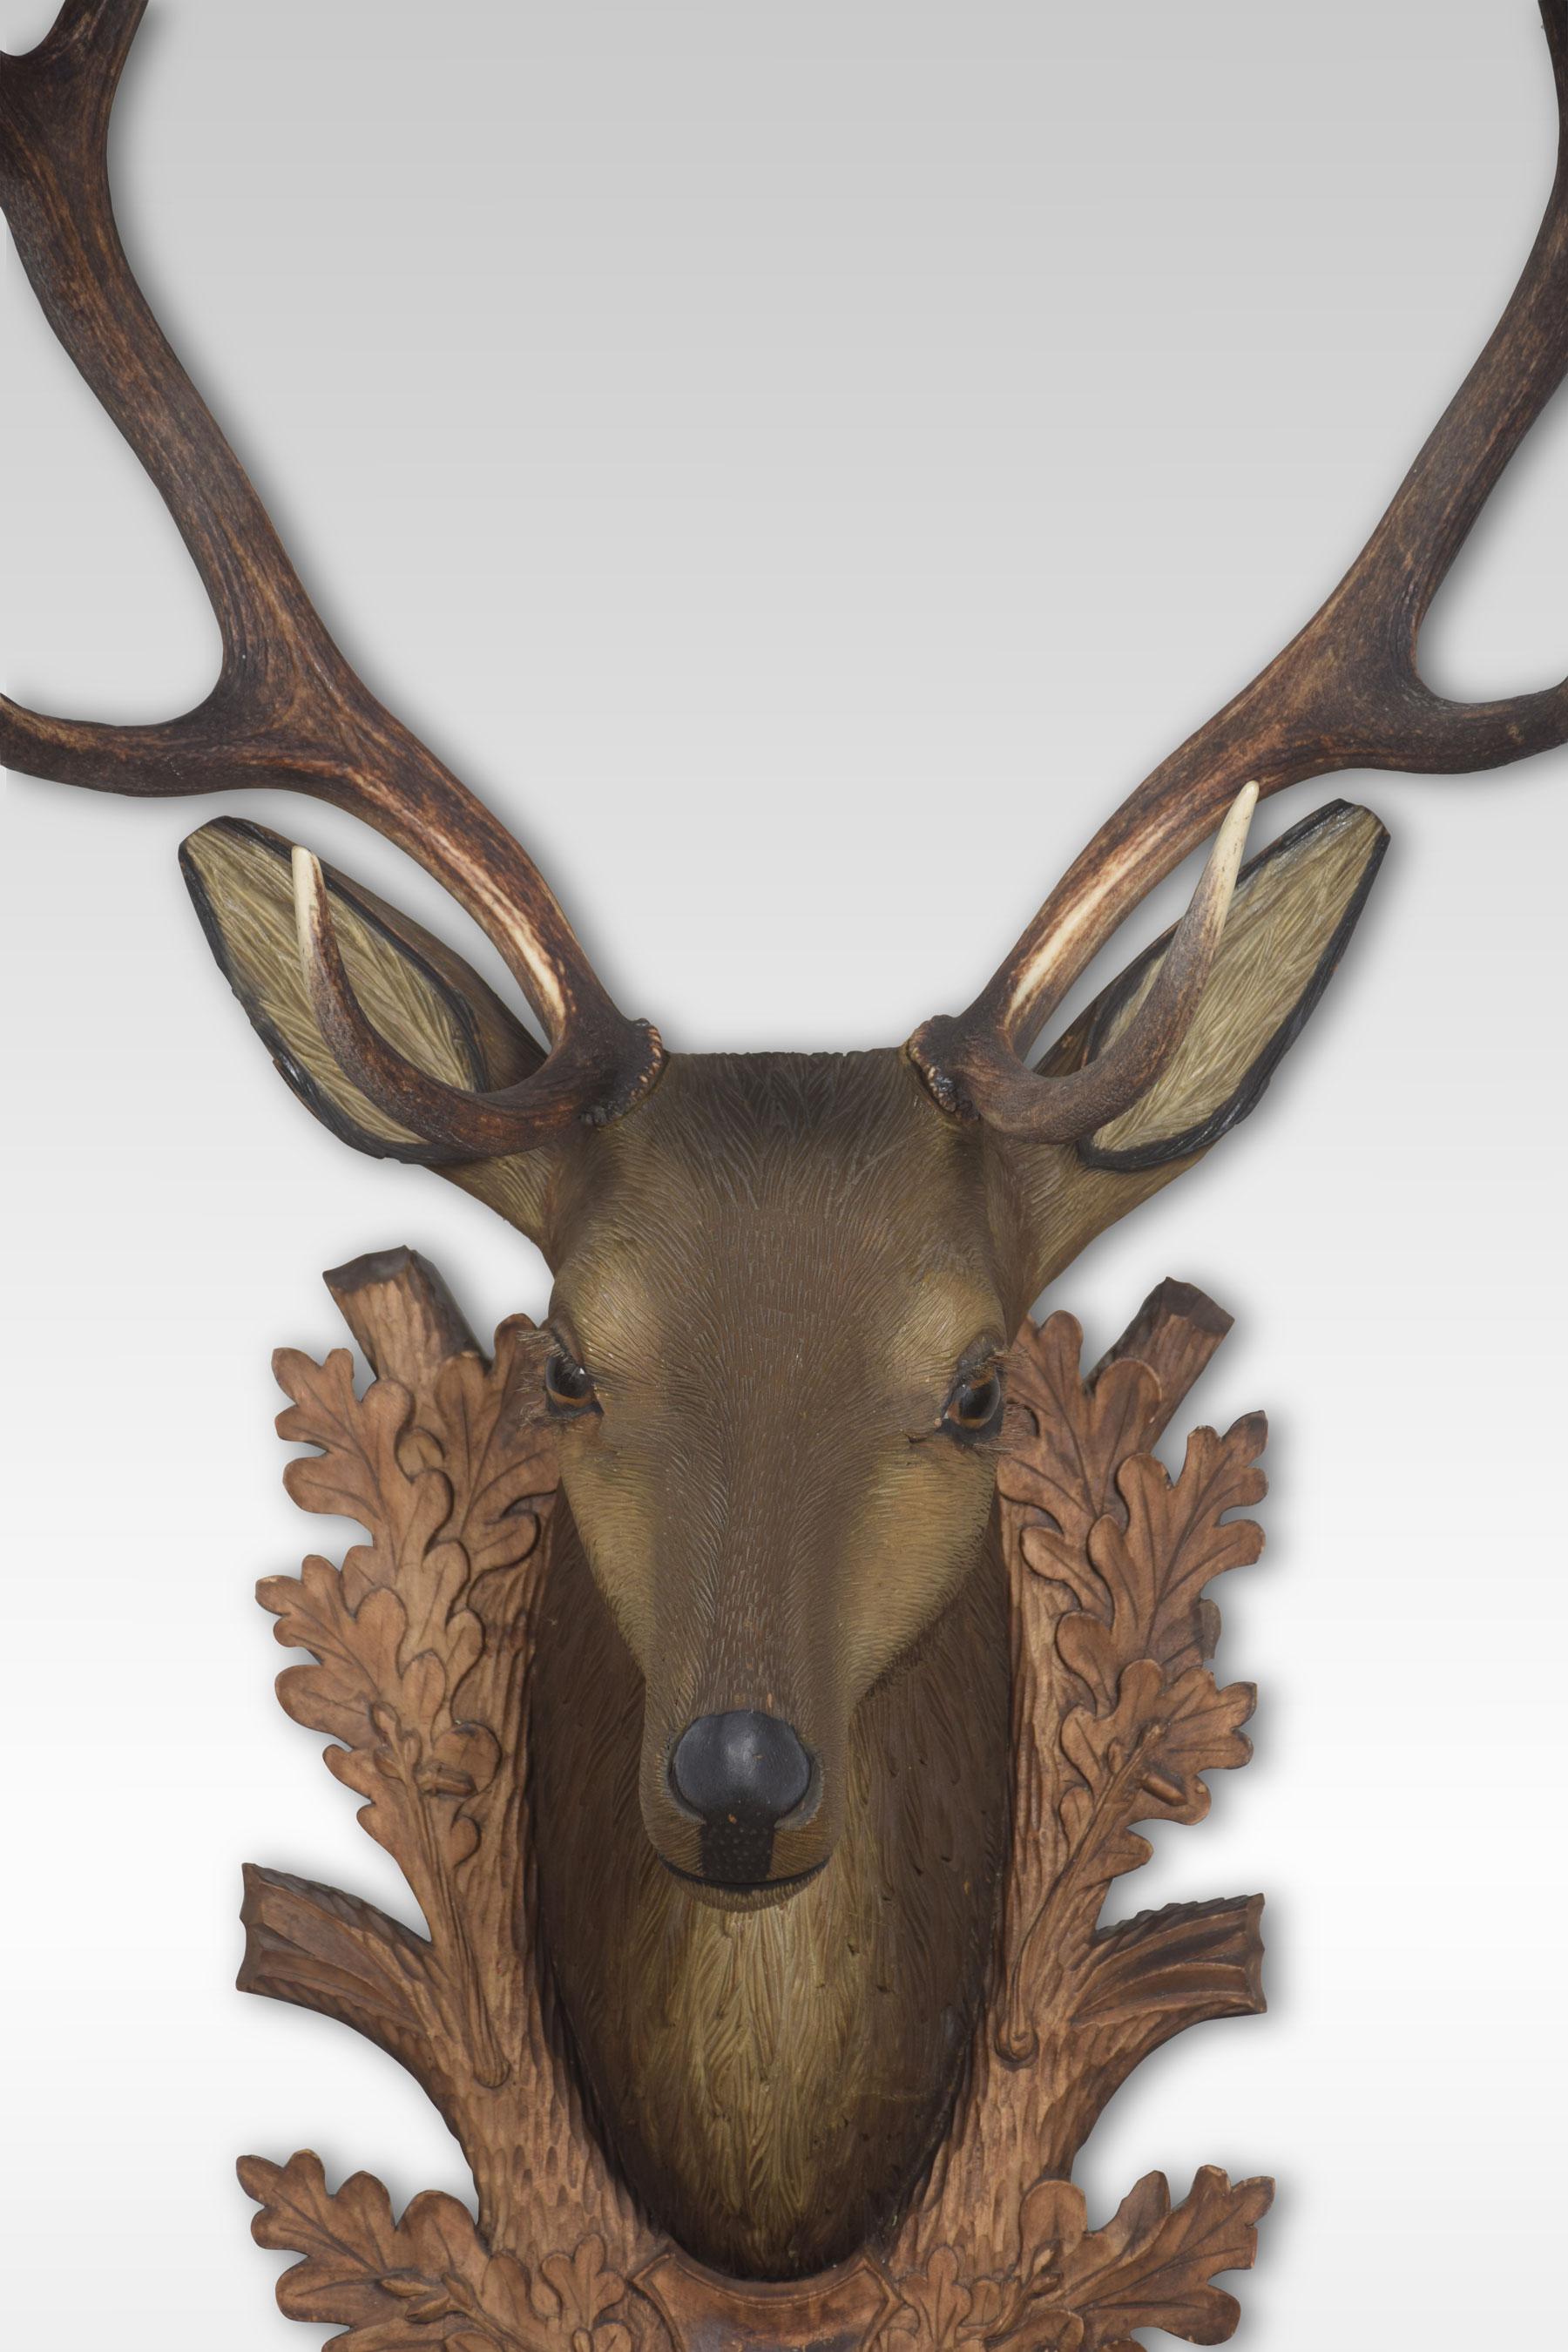 Large carved wood and polychrome decorated stags head, carved with glass eyes and taxidermy antlers. Mounted on carved back plate.
Dimensions:
Height 48.5 inches
Width 24.5 inches
Depth 16 inches.